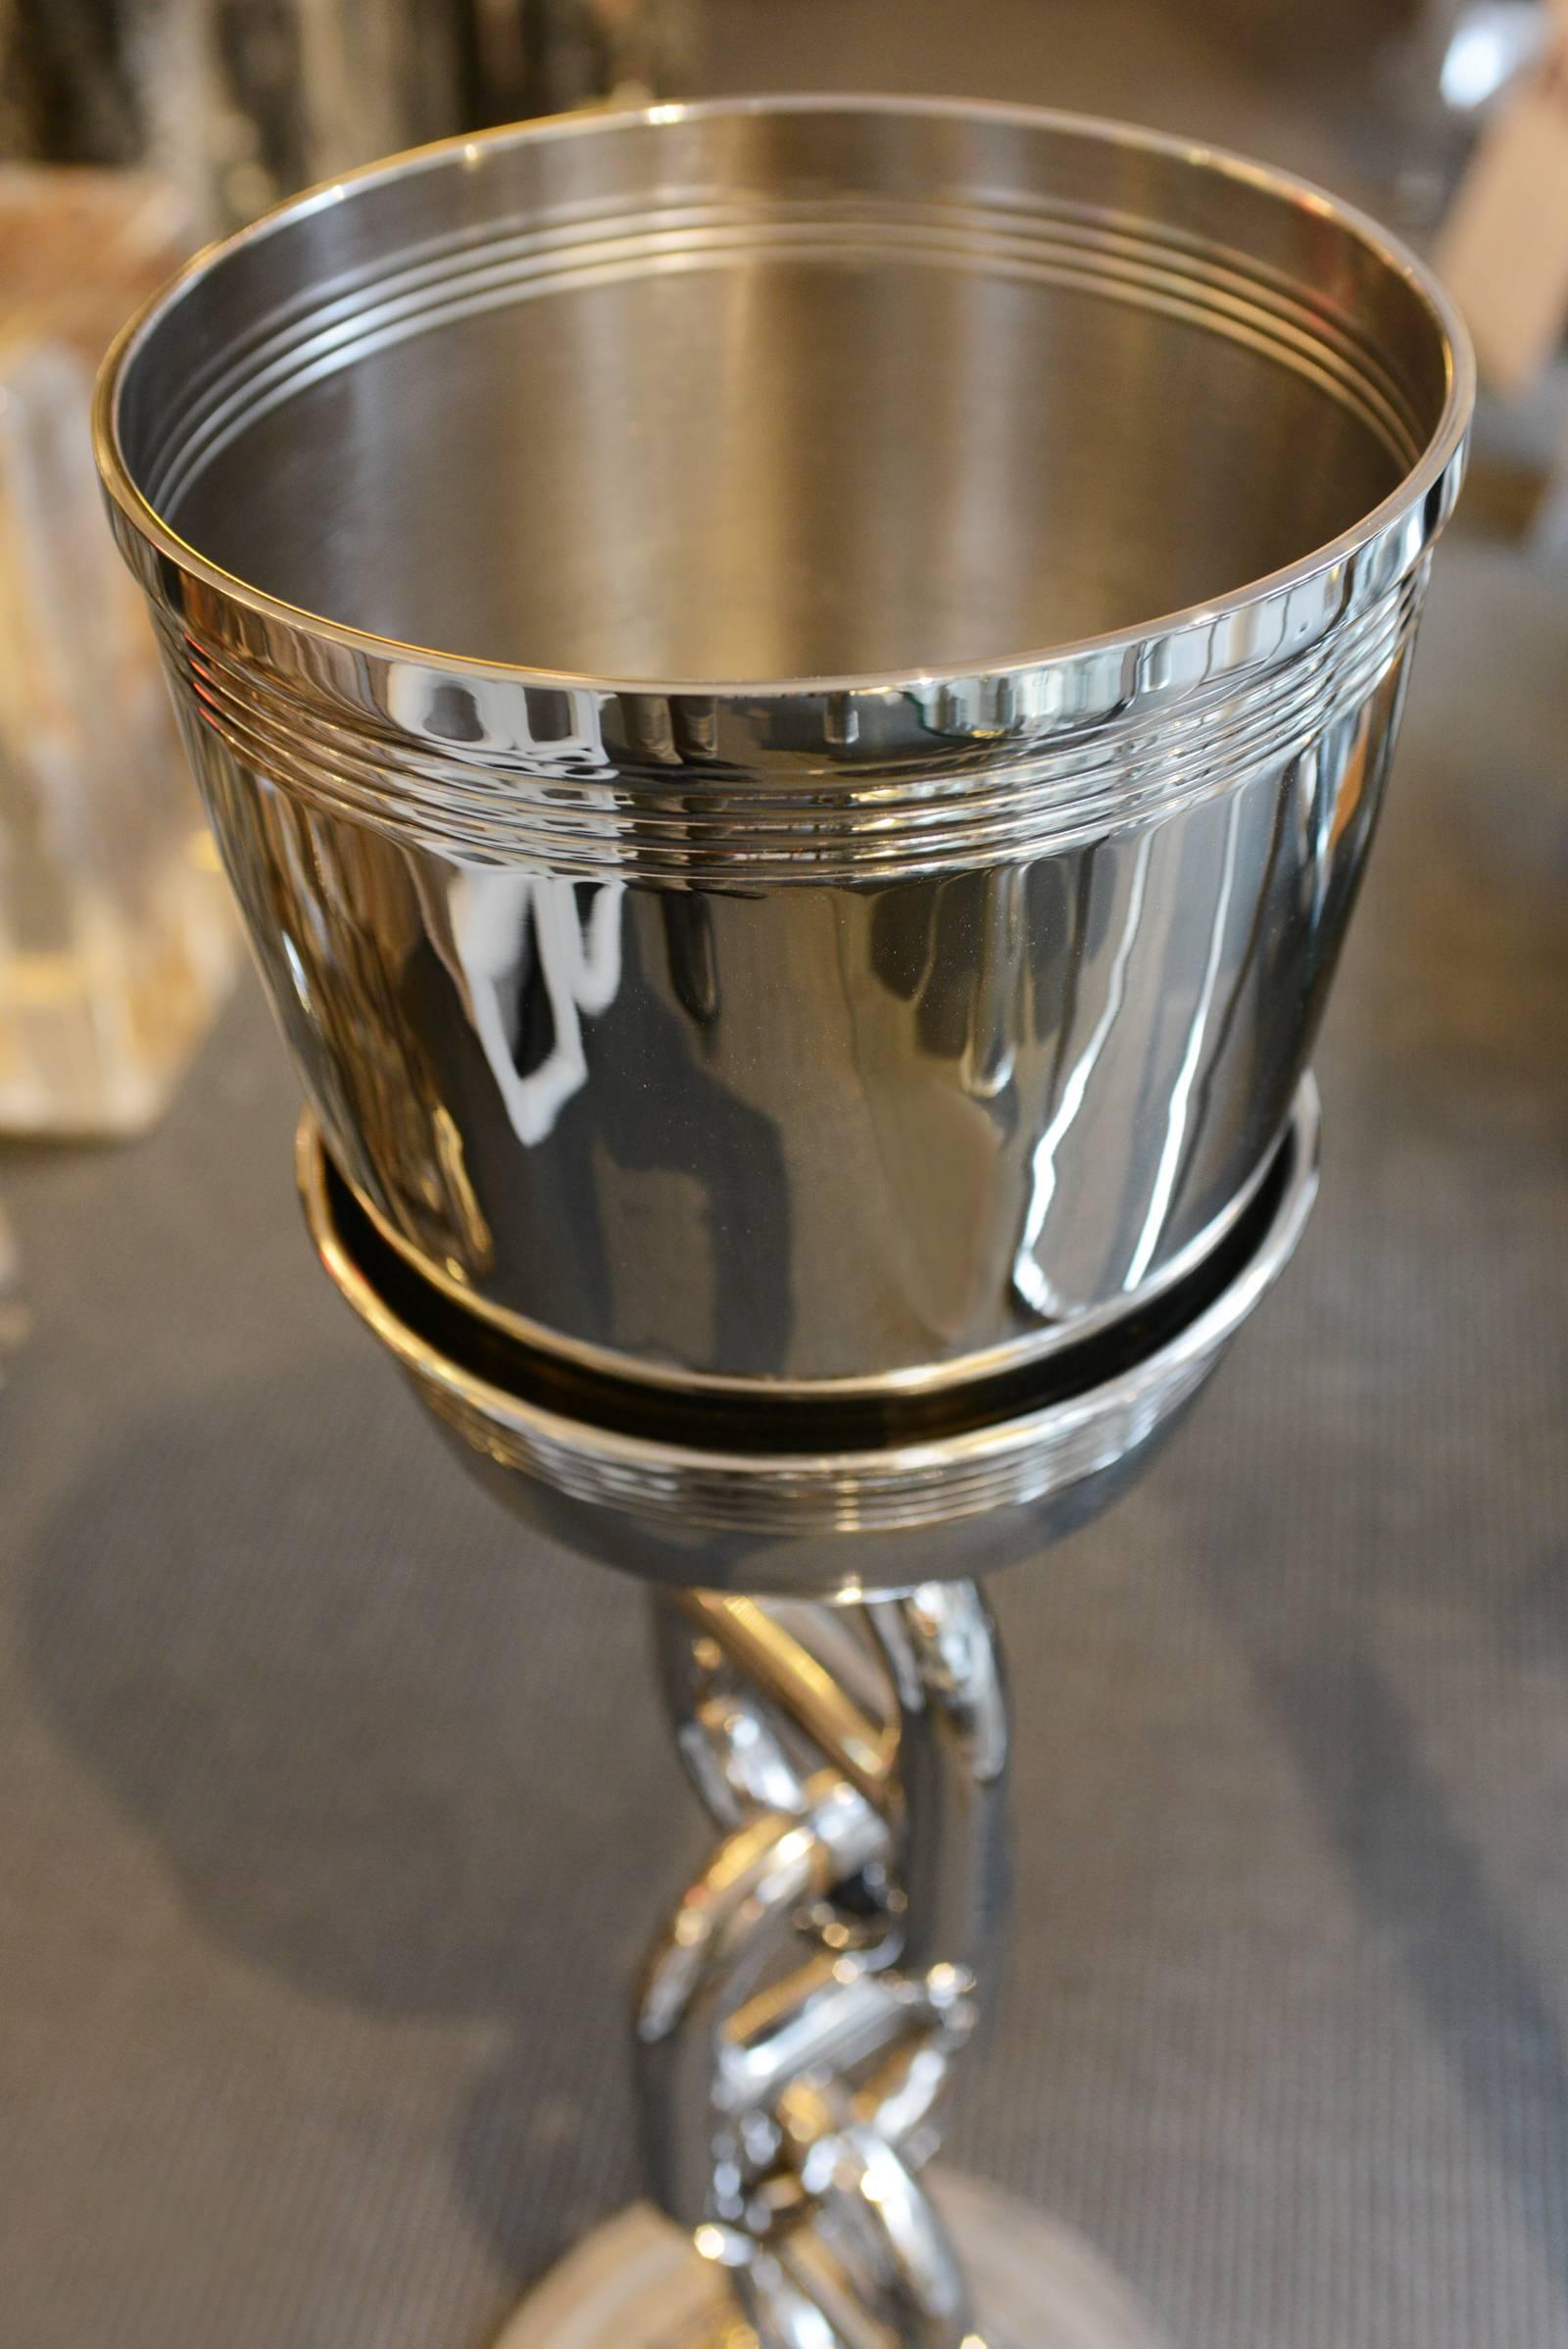 Wine cooler Hermes style on stand in polished
stainless steel. Ideal for yachting or living. In the style
of Hermes.